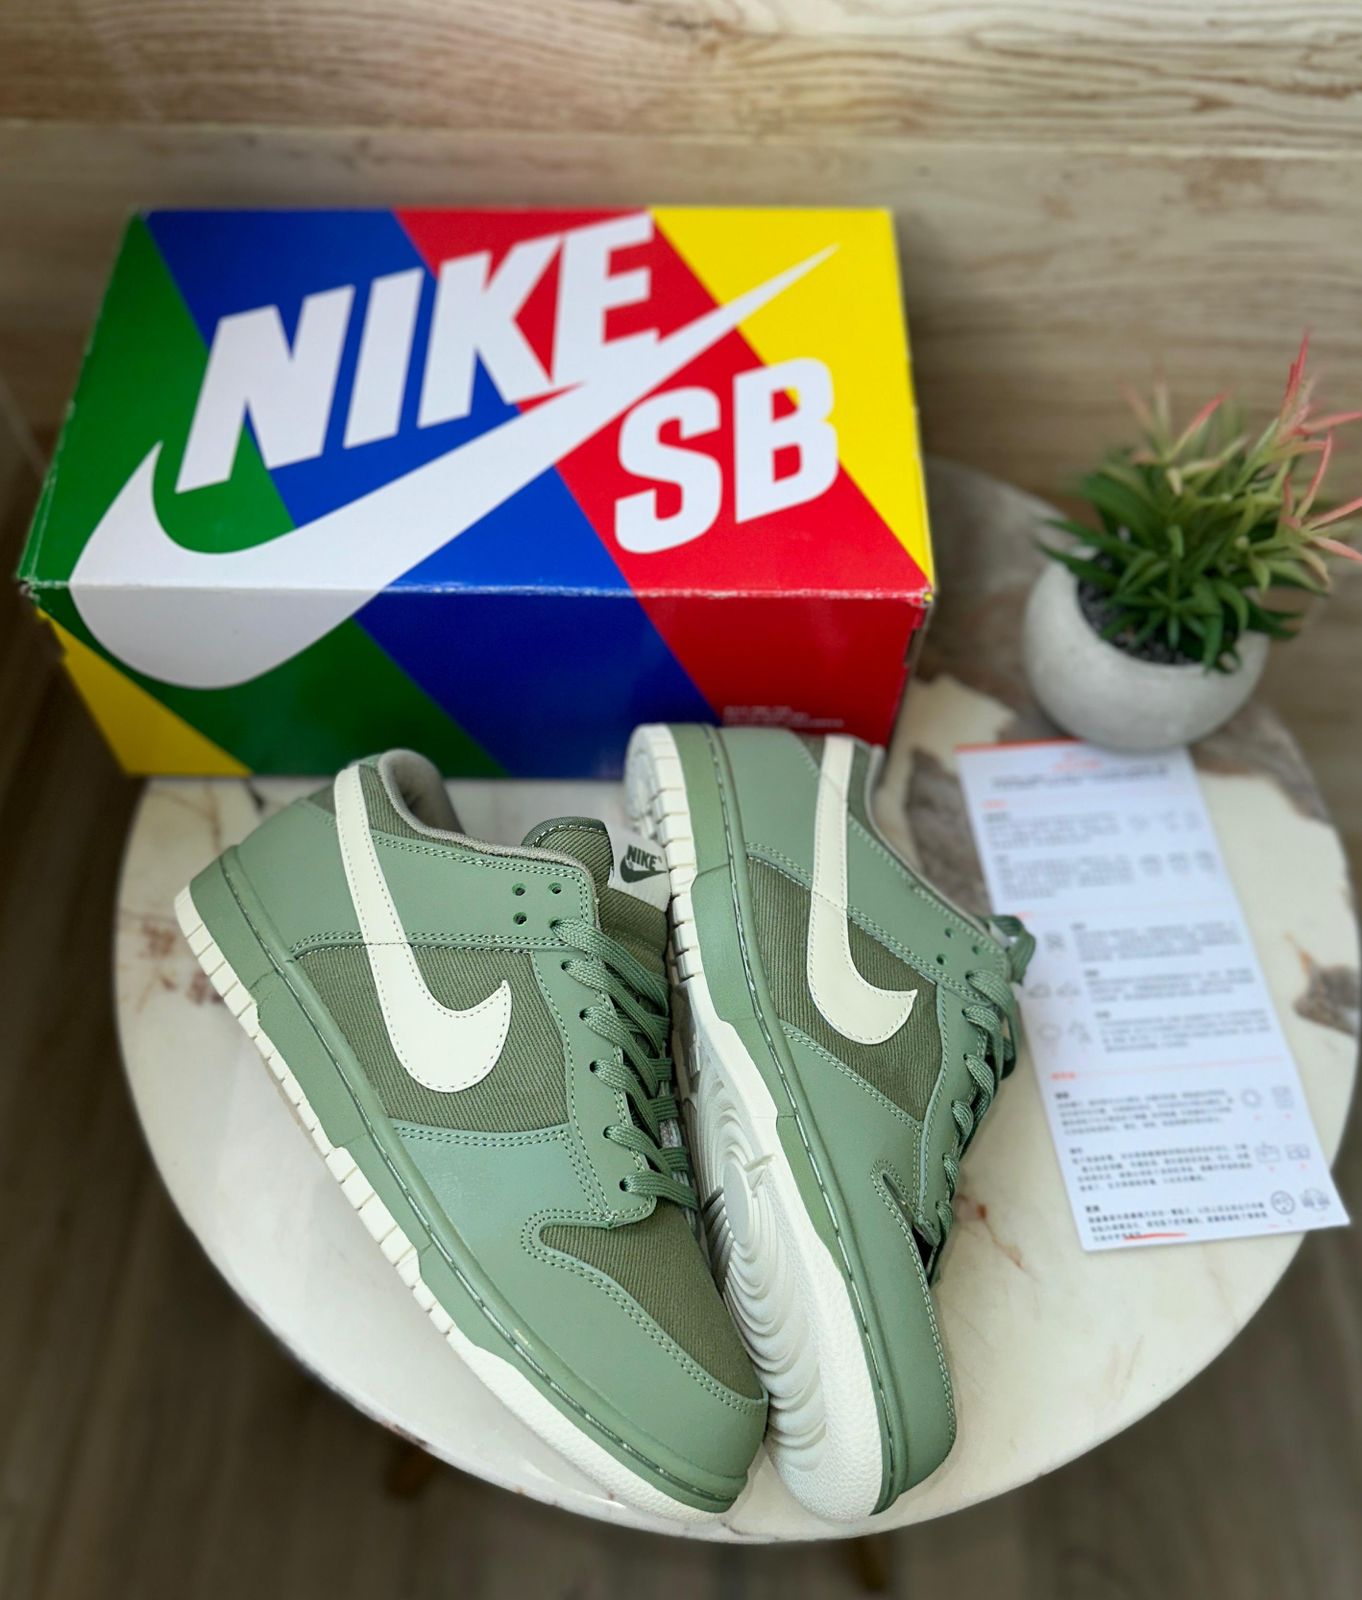 SB Dunk Oil Green Aura Shoes In Stock